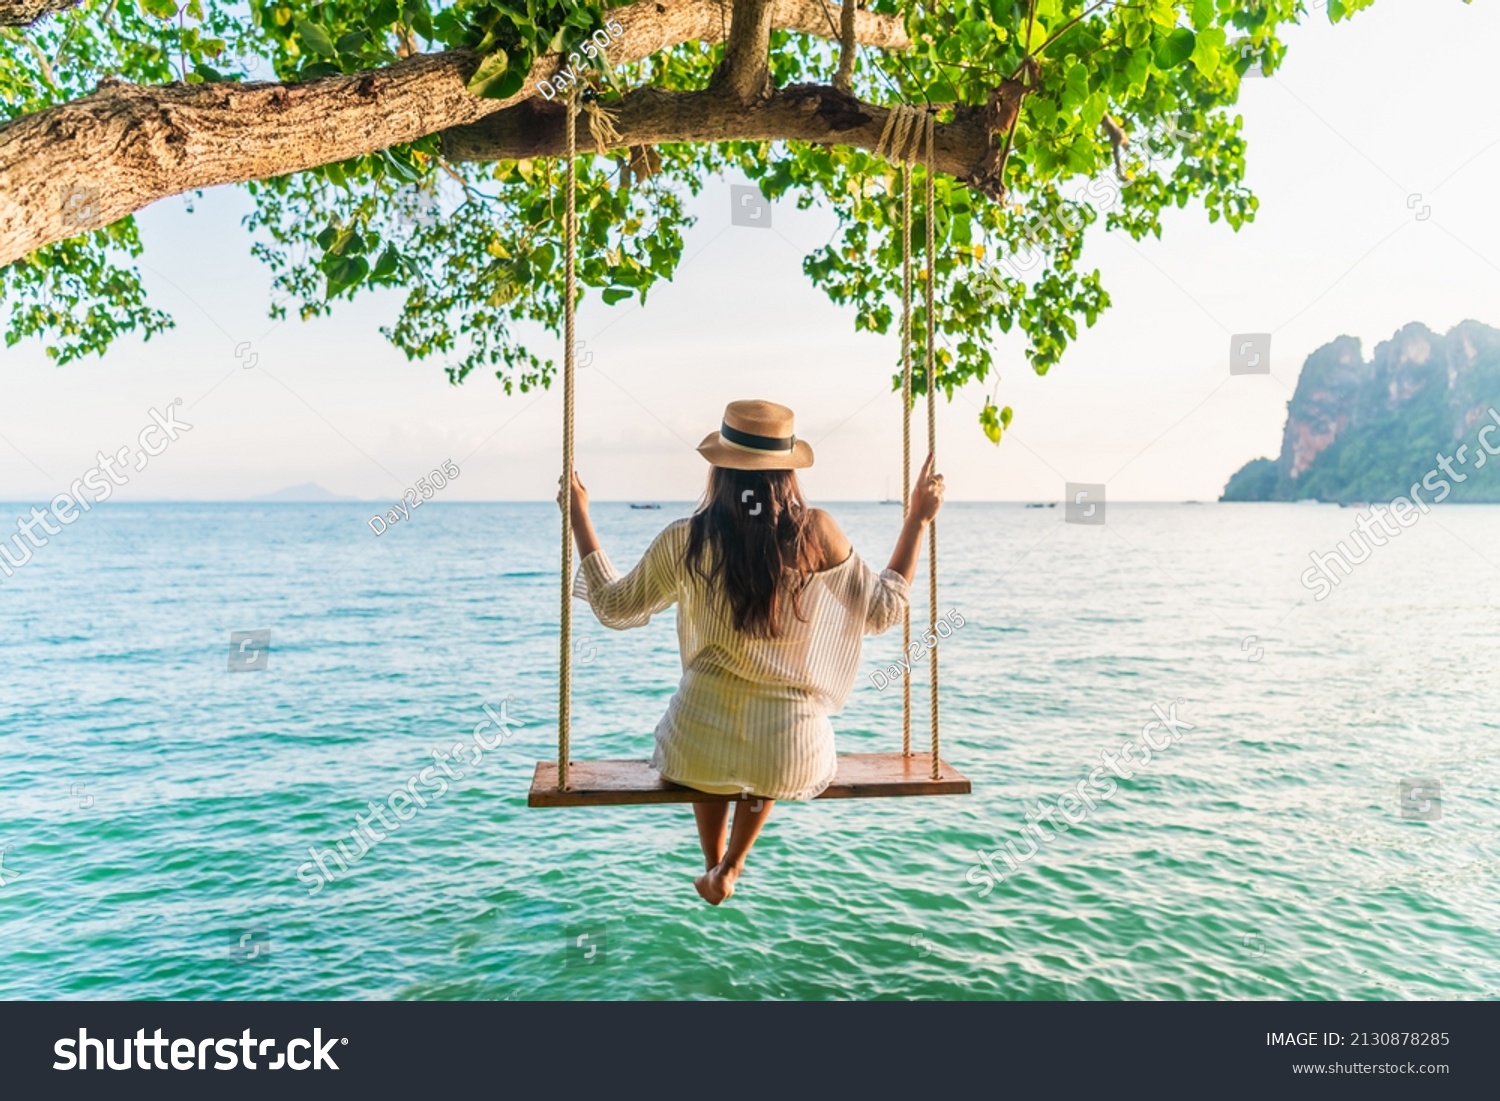 Traveler woman relaxing on swing above Andaman sea Railay beach Krabi, Leisure tourist travel Phuket Thailand summer holiday vacation trip, Beautiful destinations place Asia, Happy dream concept #2130878285